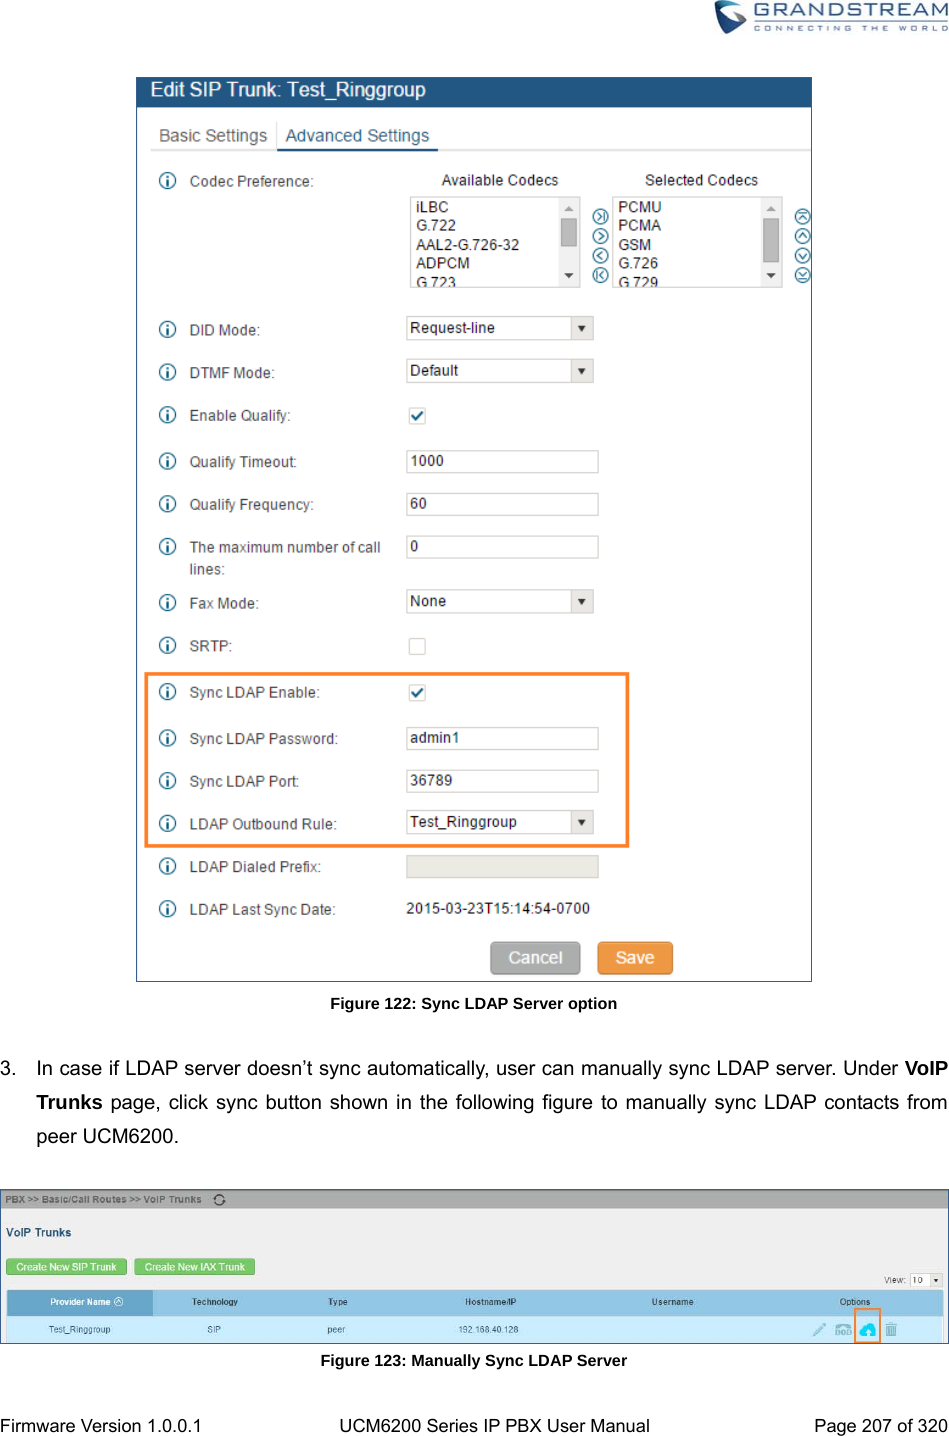  Firmware Version 1.0.0.1  UCM6200 Series IP PBX User Manual  Page 207 of 320  Figure 122: Sync LDAP Server option  3.  In case if LDAP server doesn’t sync automatically, user can manually sync LDAP server. Under VoIP Trunks  page, click sync button shown in the following figure to manually sync LDAP contacts from peer UCM6200.   Figure 123: Manually Sync LDAP Server 